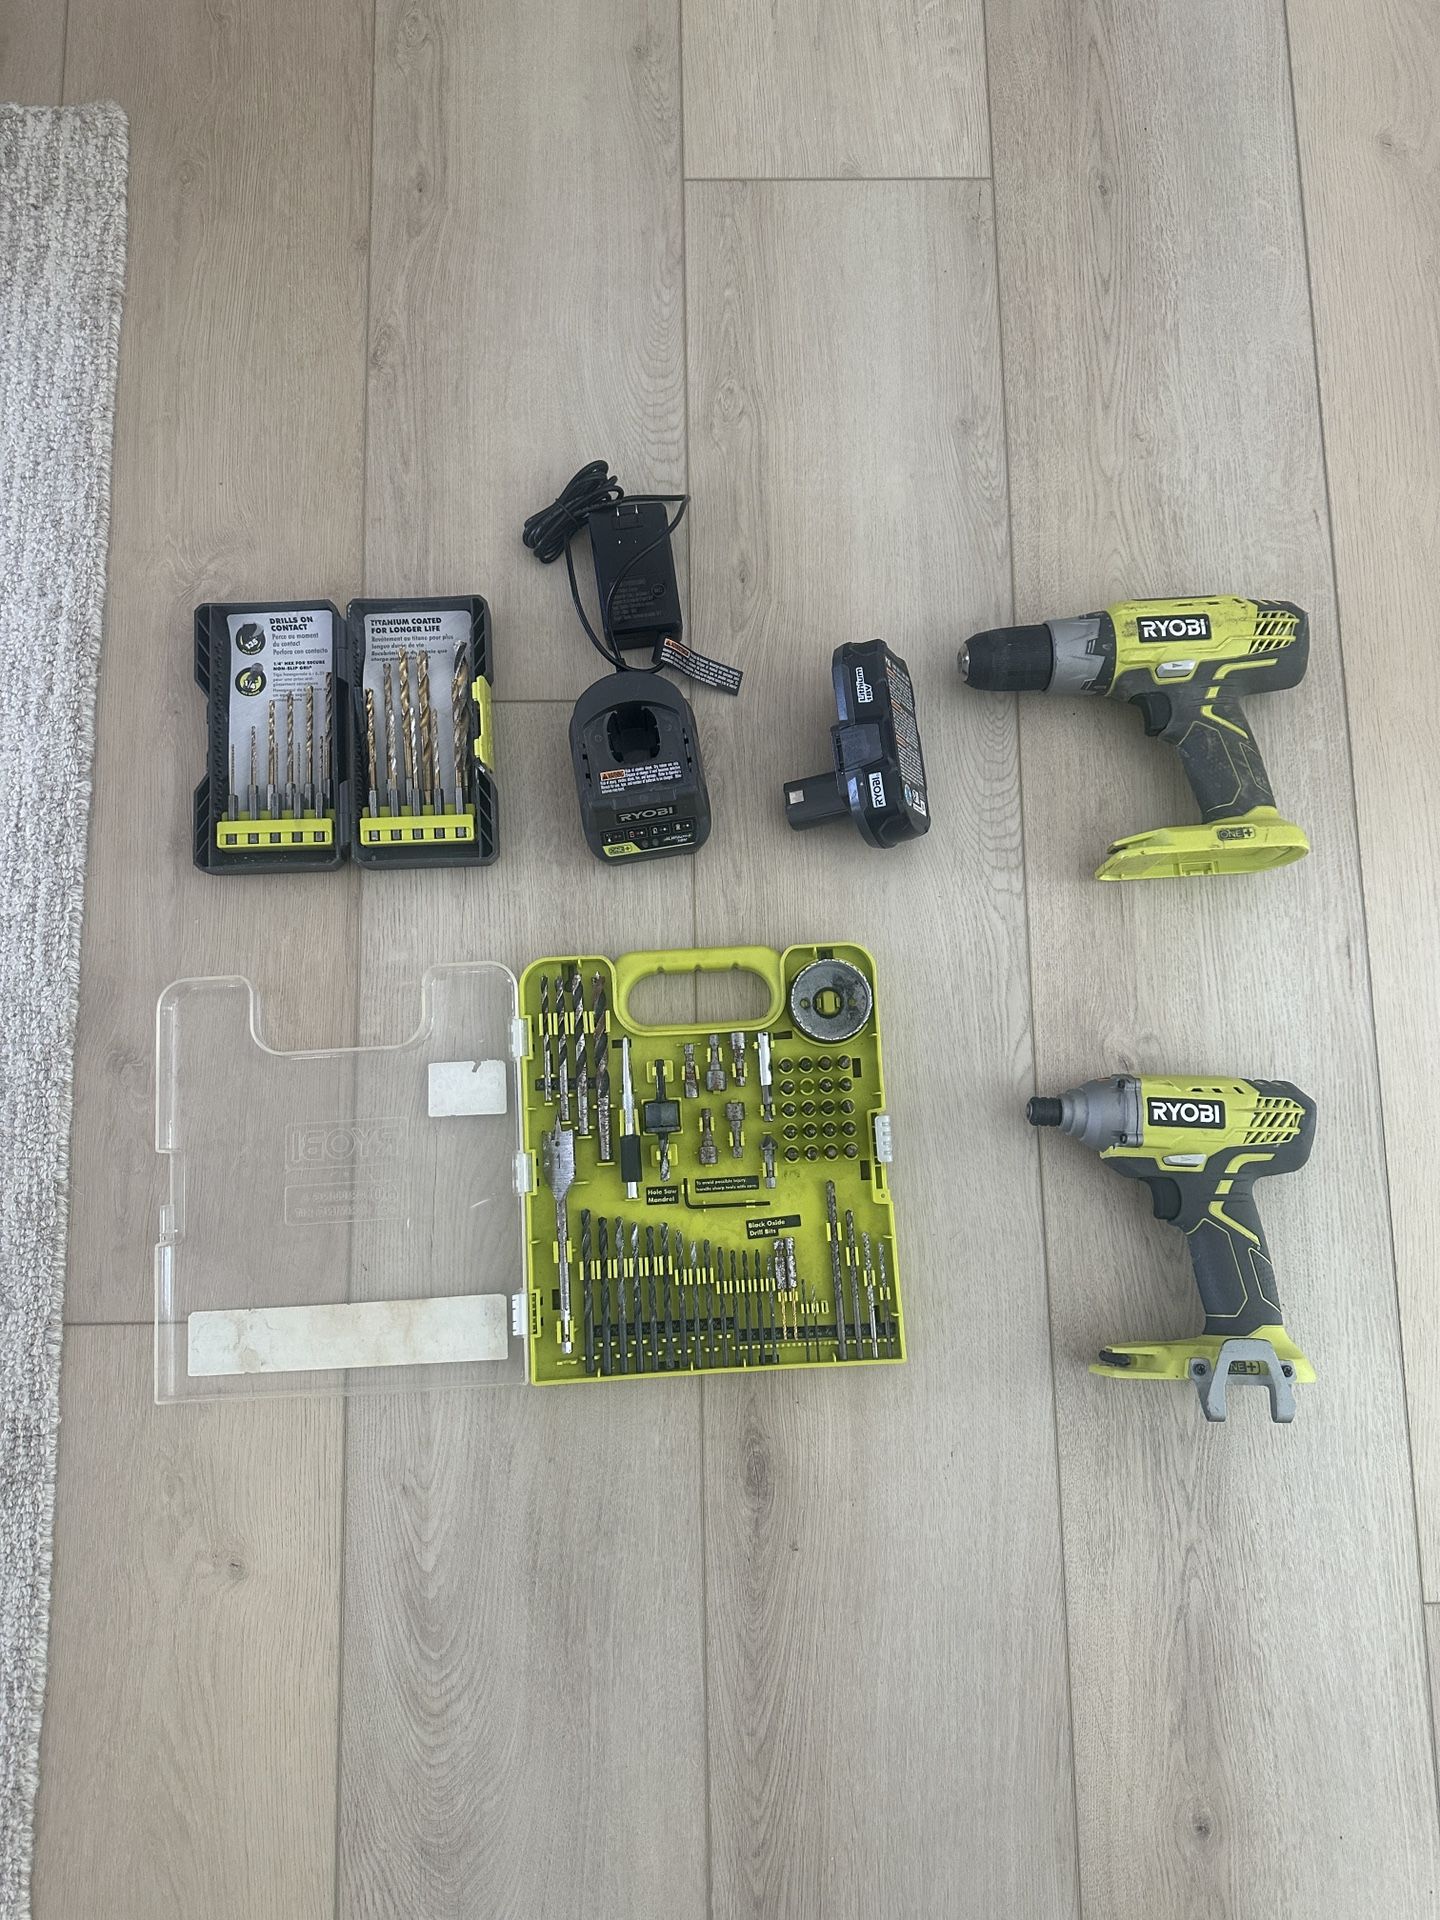 Ryobi Drill/Impact Driver with lots of drill bits